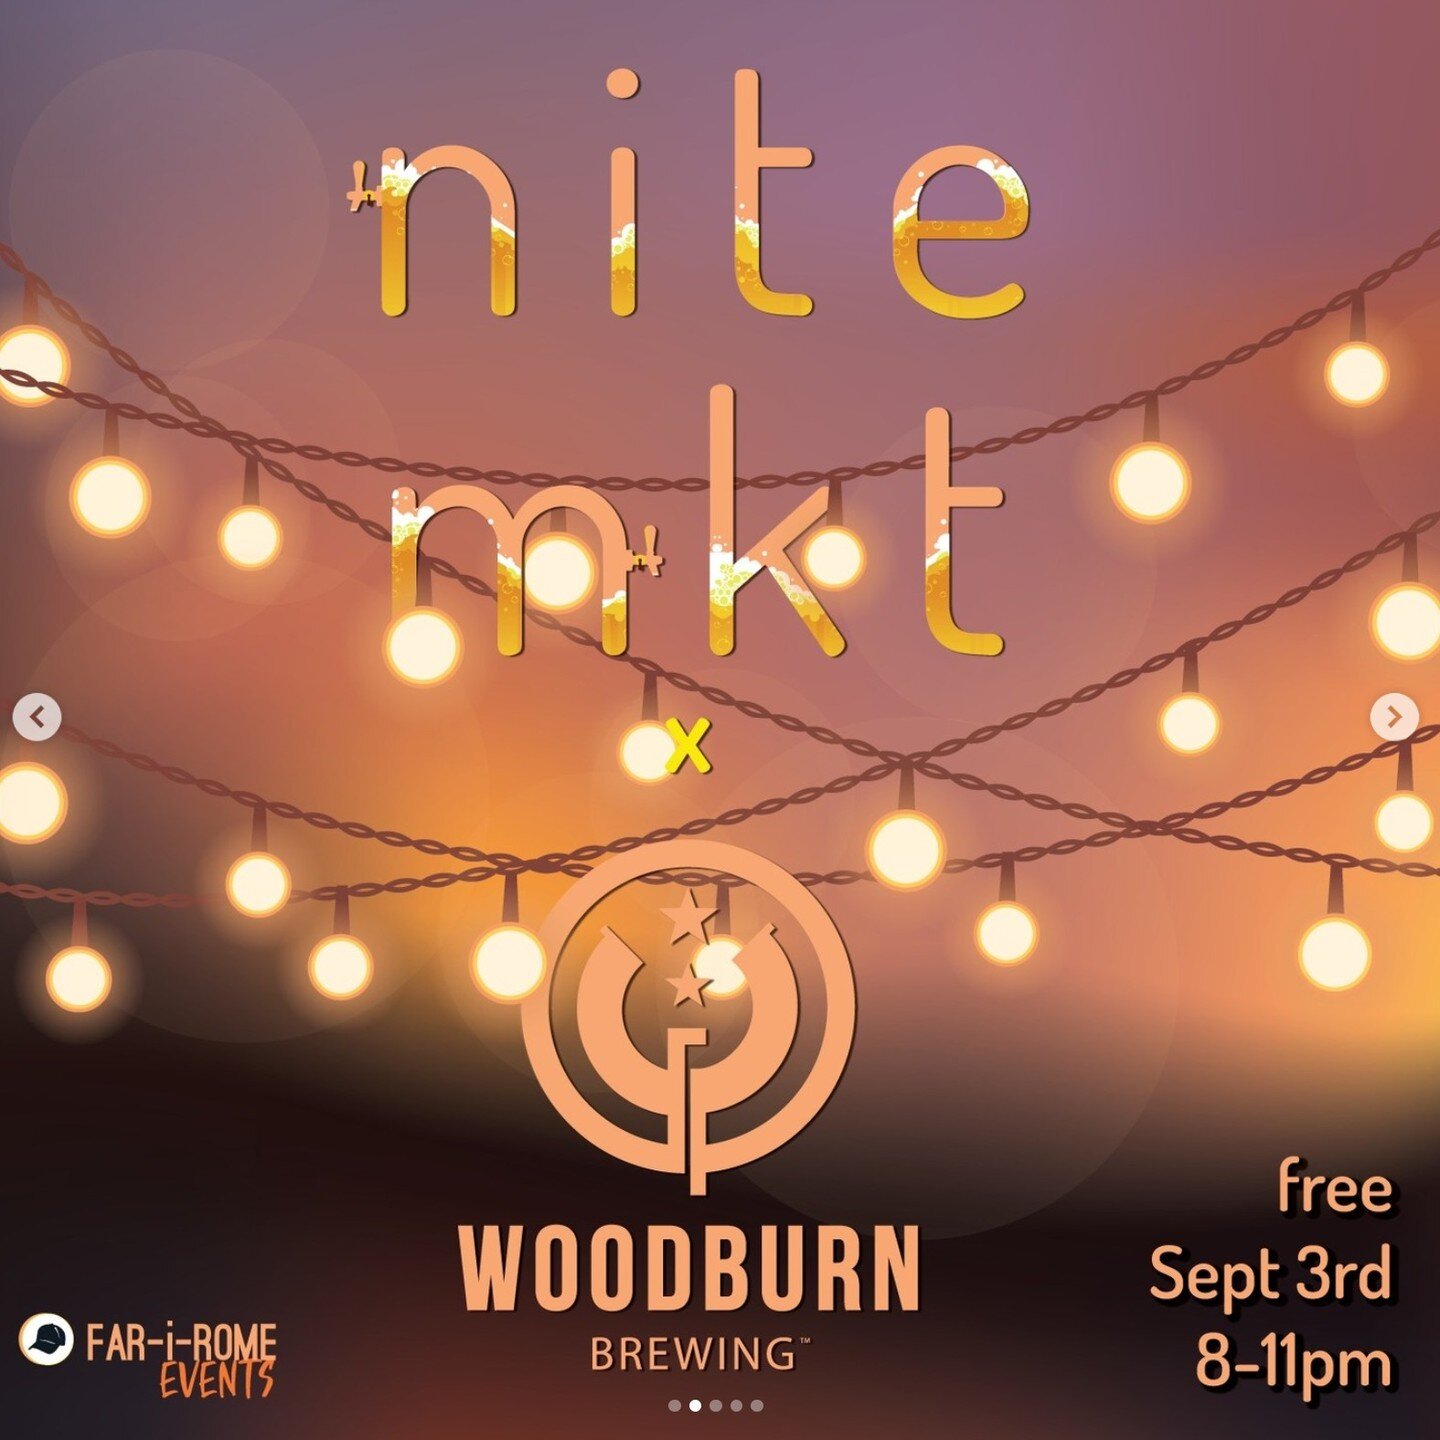 Wanna se what our new ingredients are being used for? Come check out our new products this Saturday at Nite Mkt!

Woodburn Brewery
8-11p

#plantbasedproducts #sensitiveskincare #loveyourskin❤️ #abndnce @nitemkt @woodburnbrewing